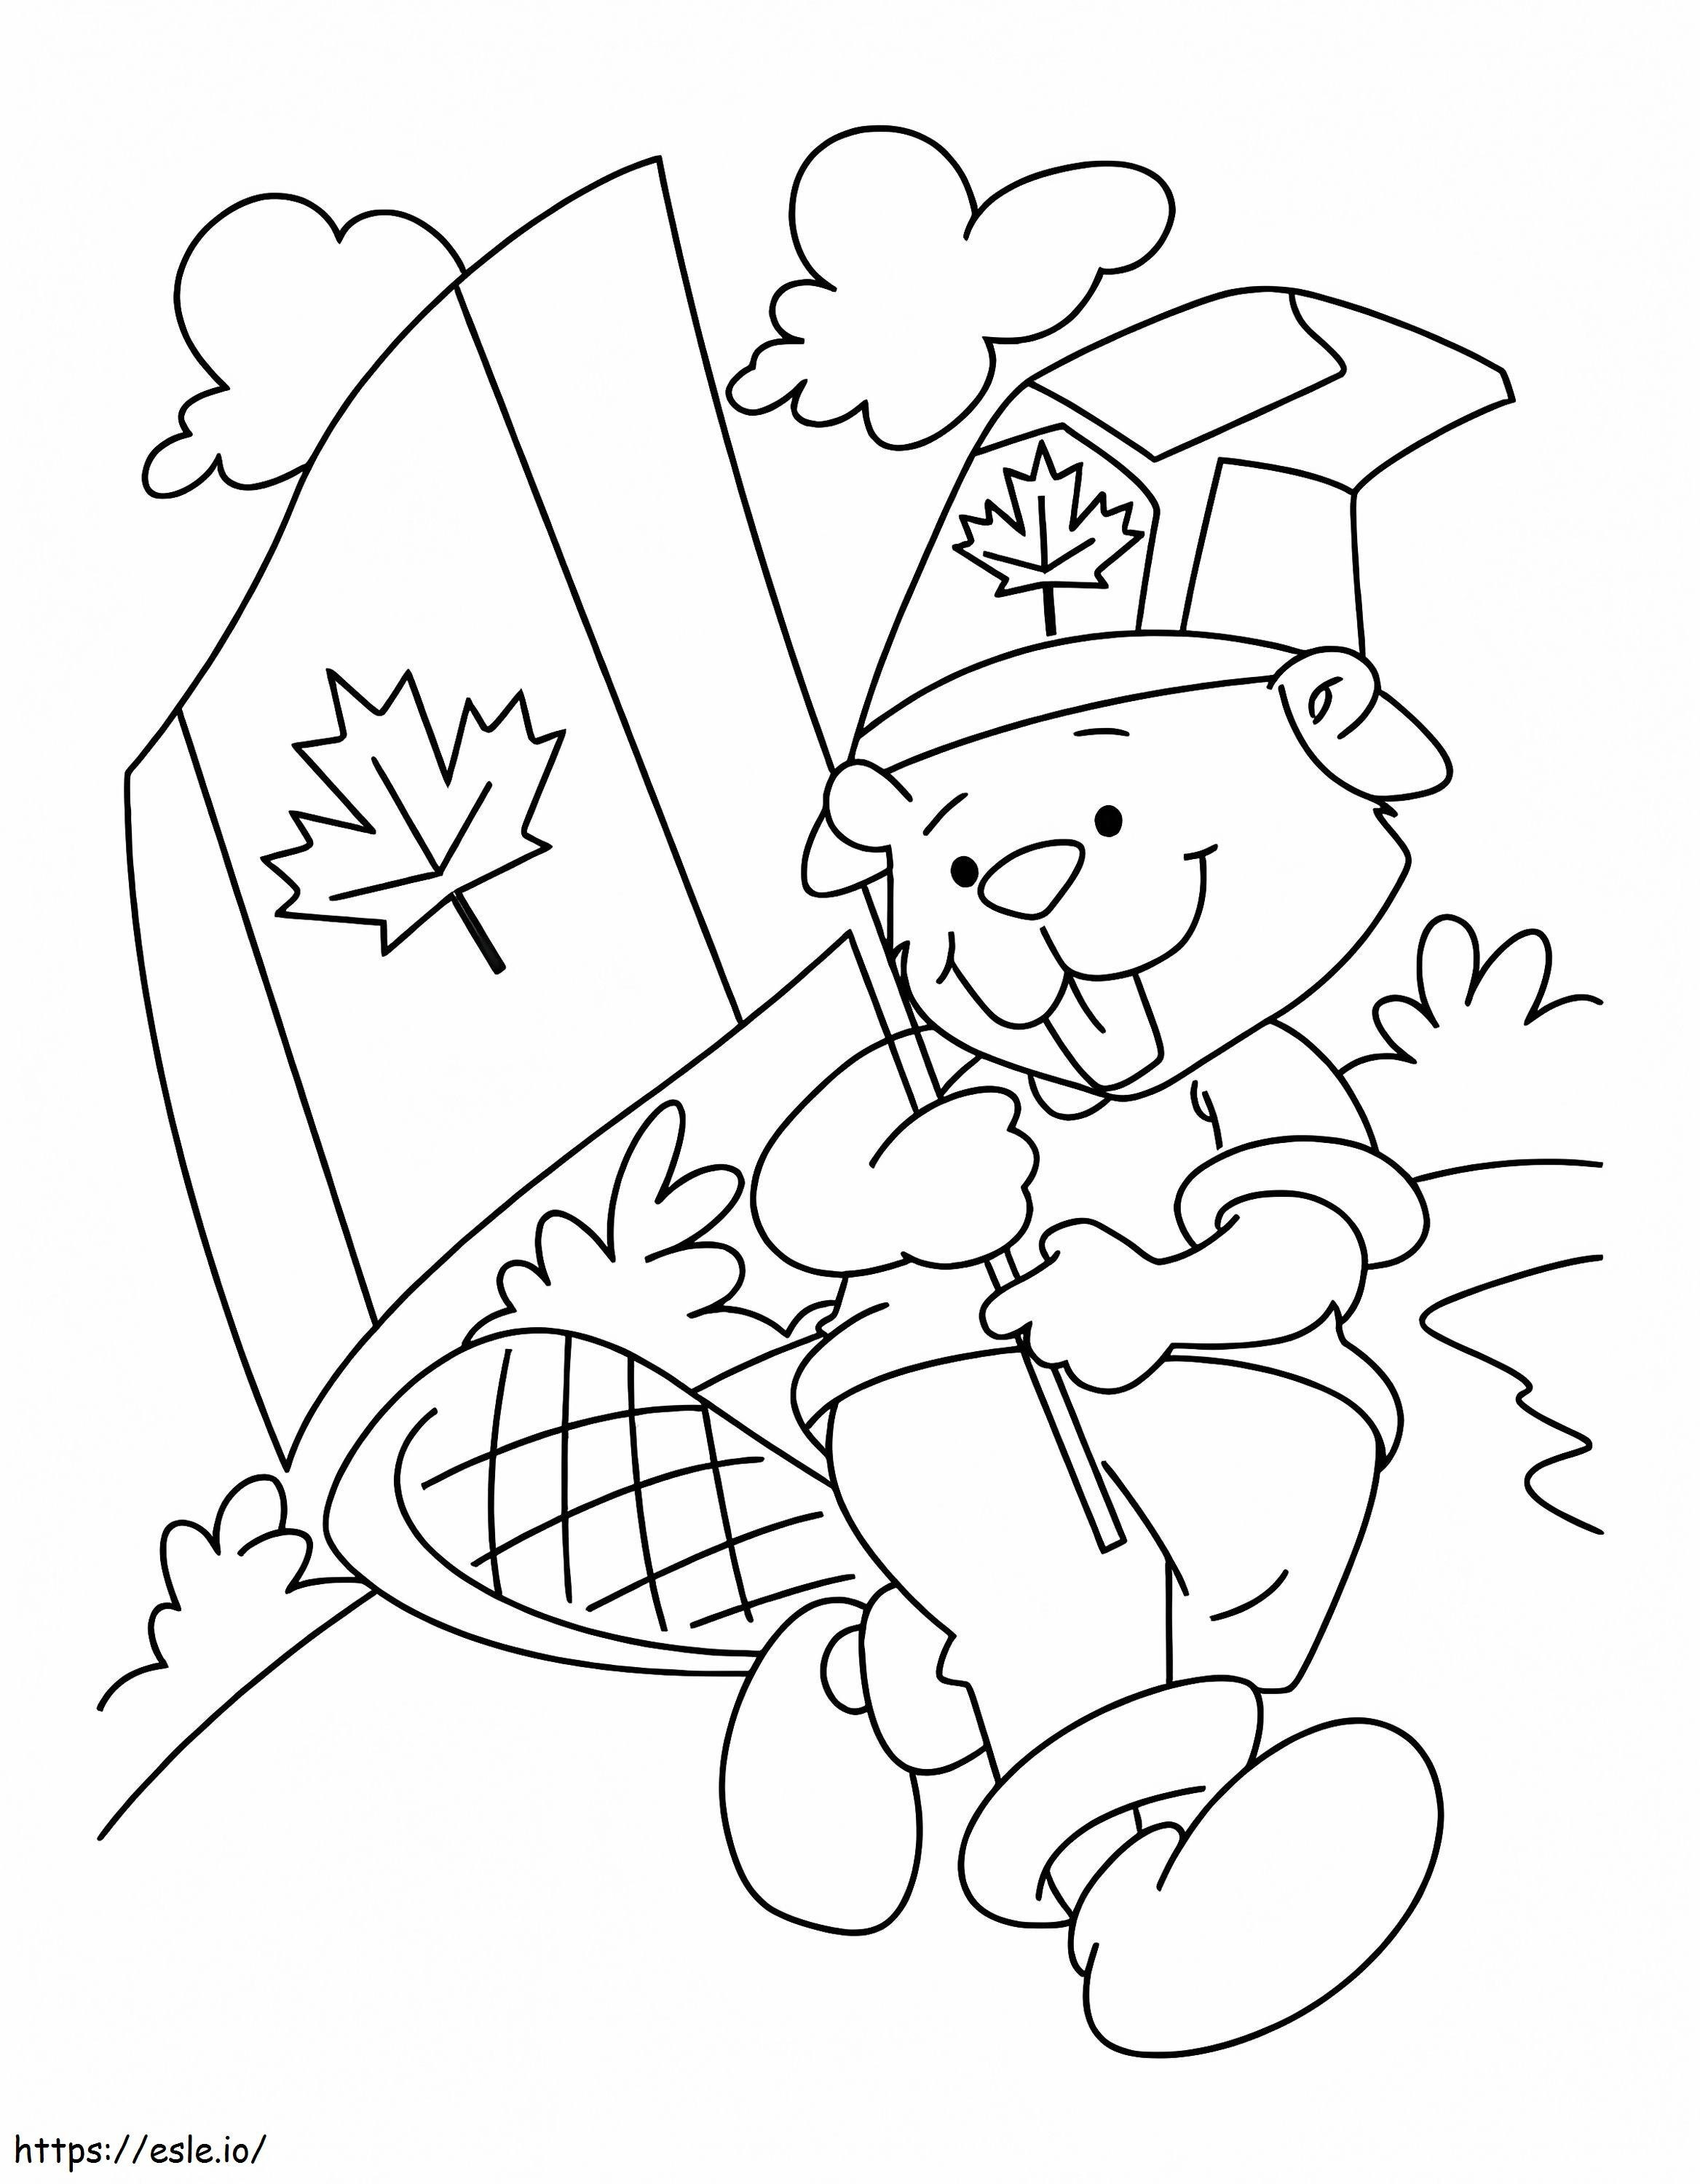 Beaver Boyscout On Canada Day coloring page